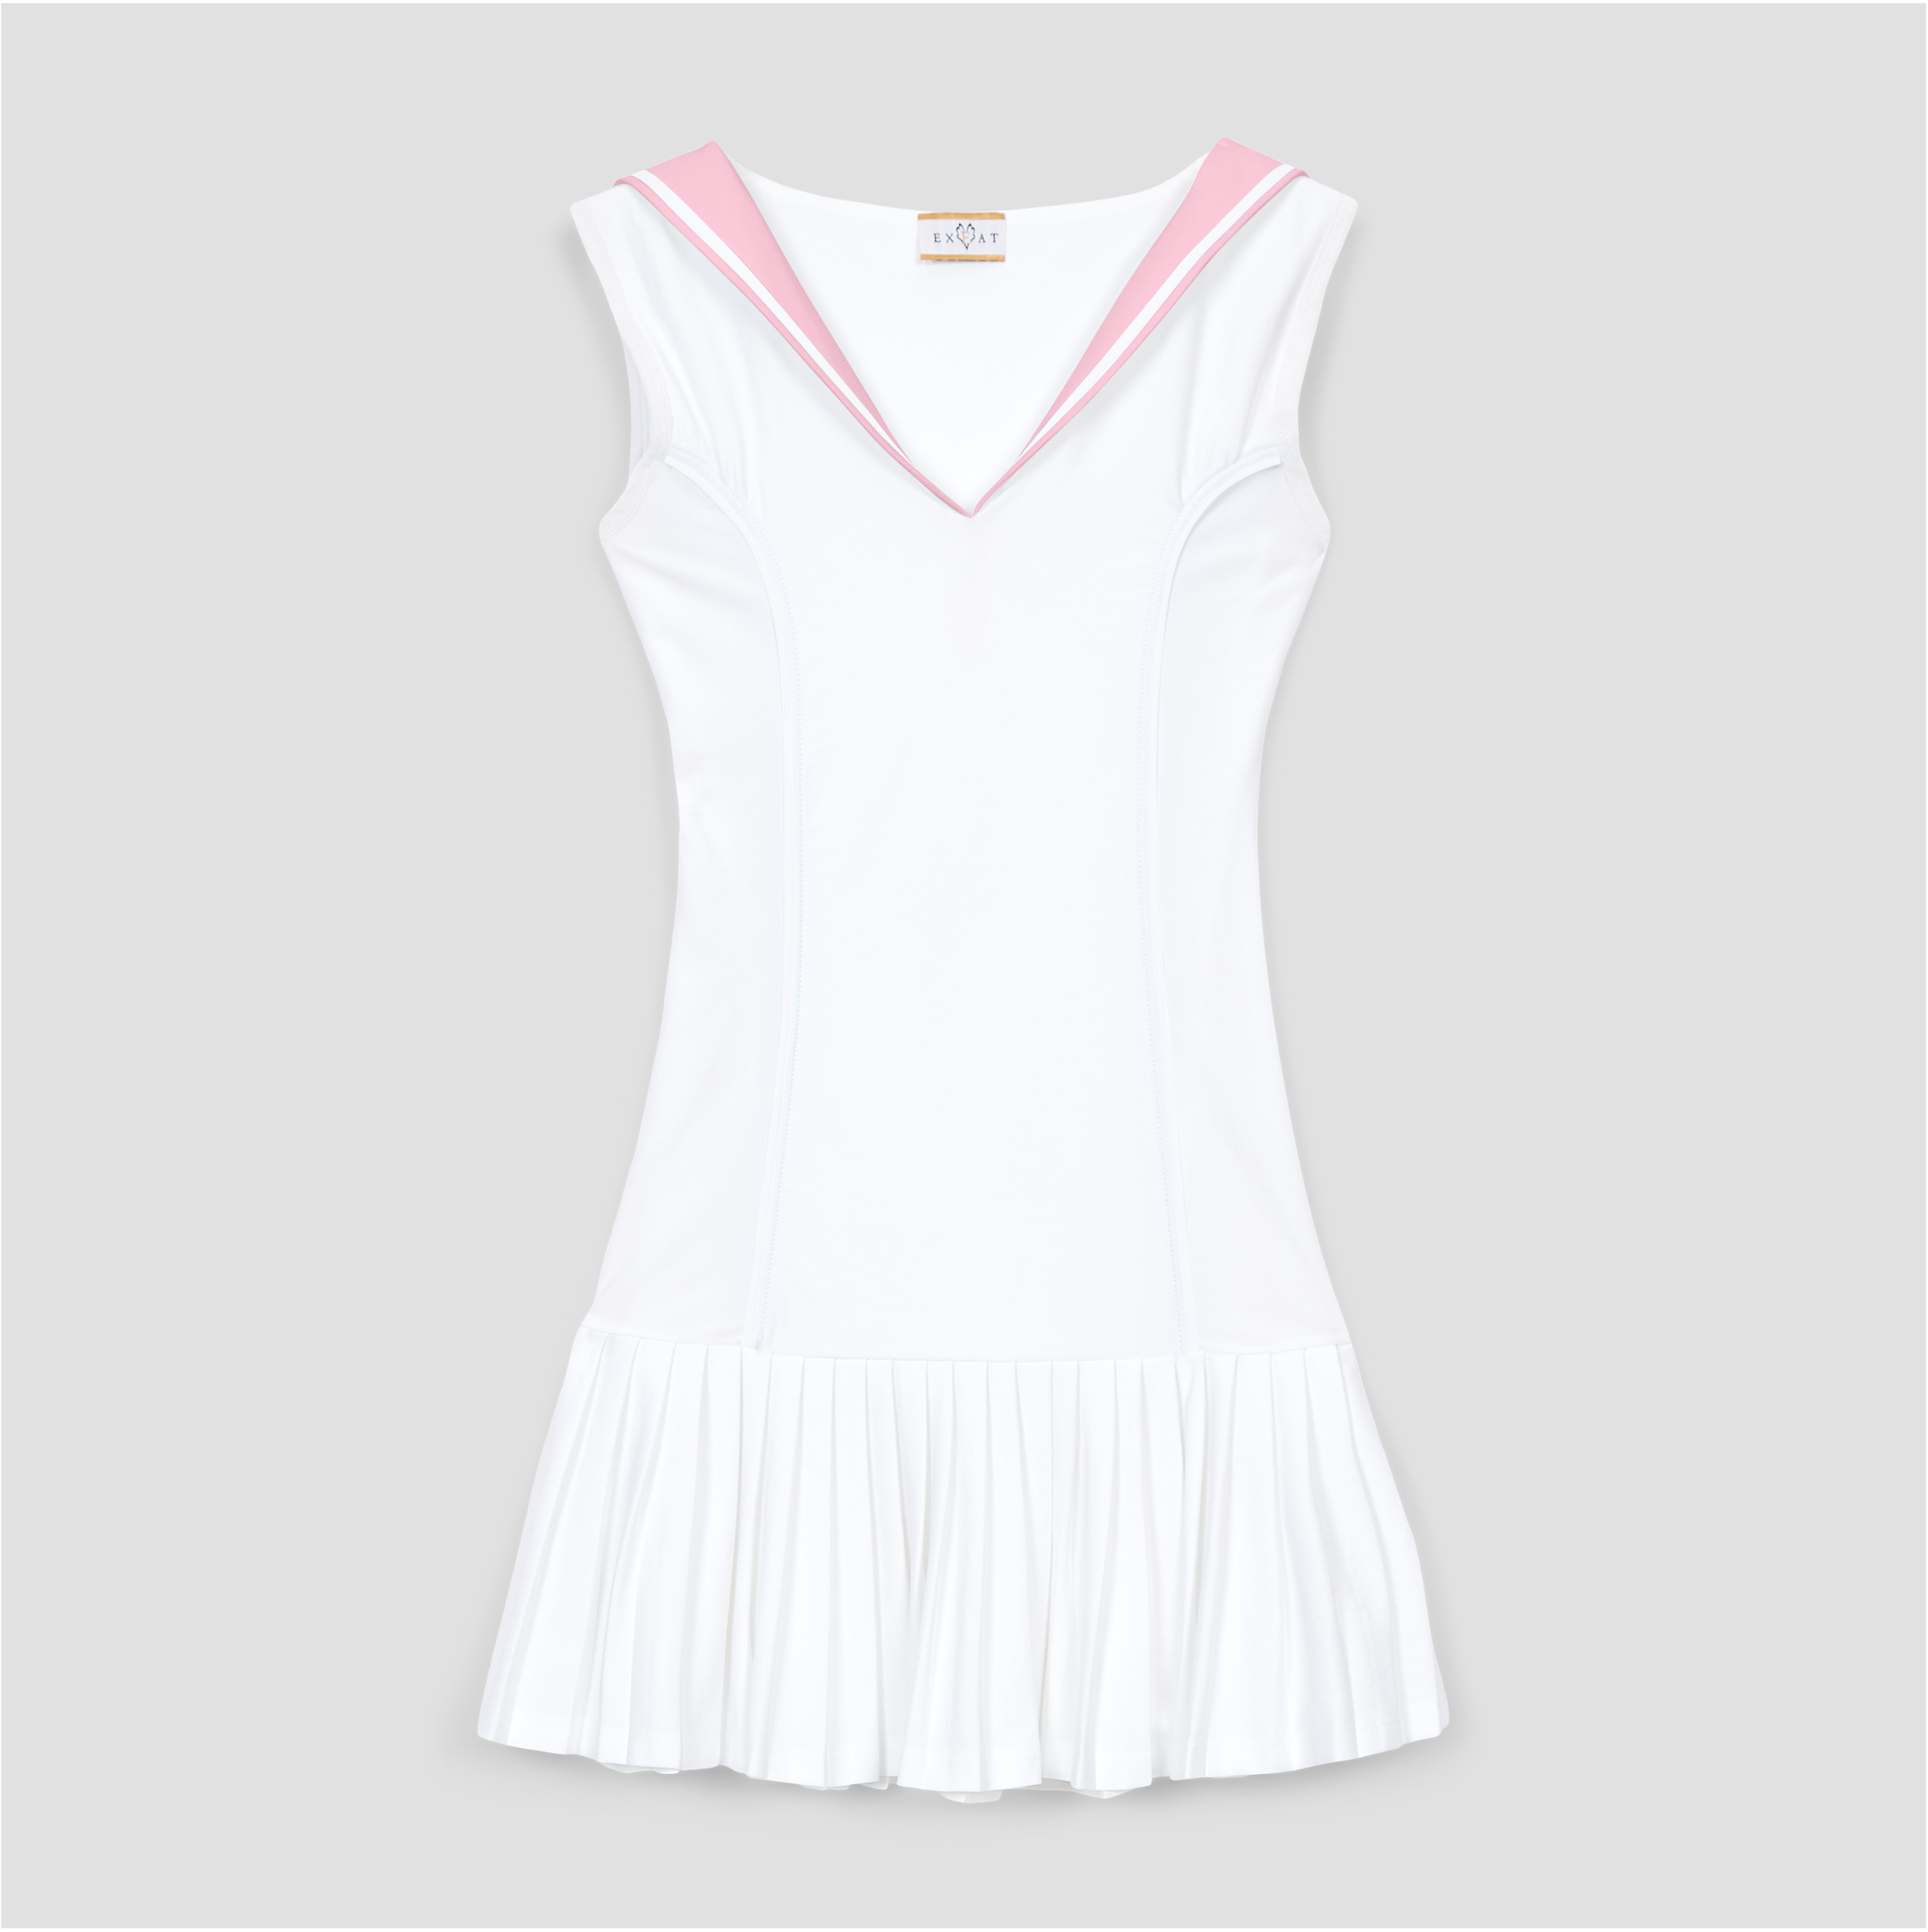 exeat-capulet-tennis-dress-pink-white-sailor-collar-pleated-fr.png